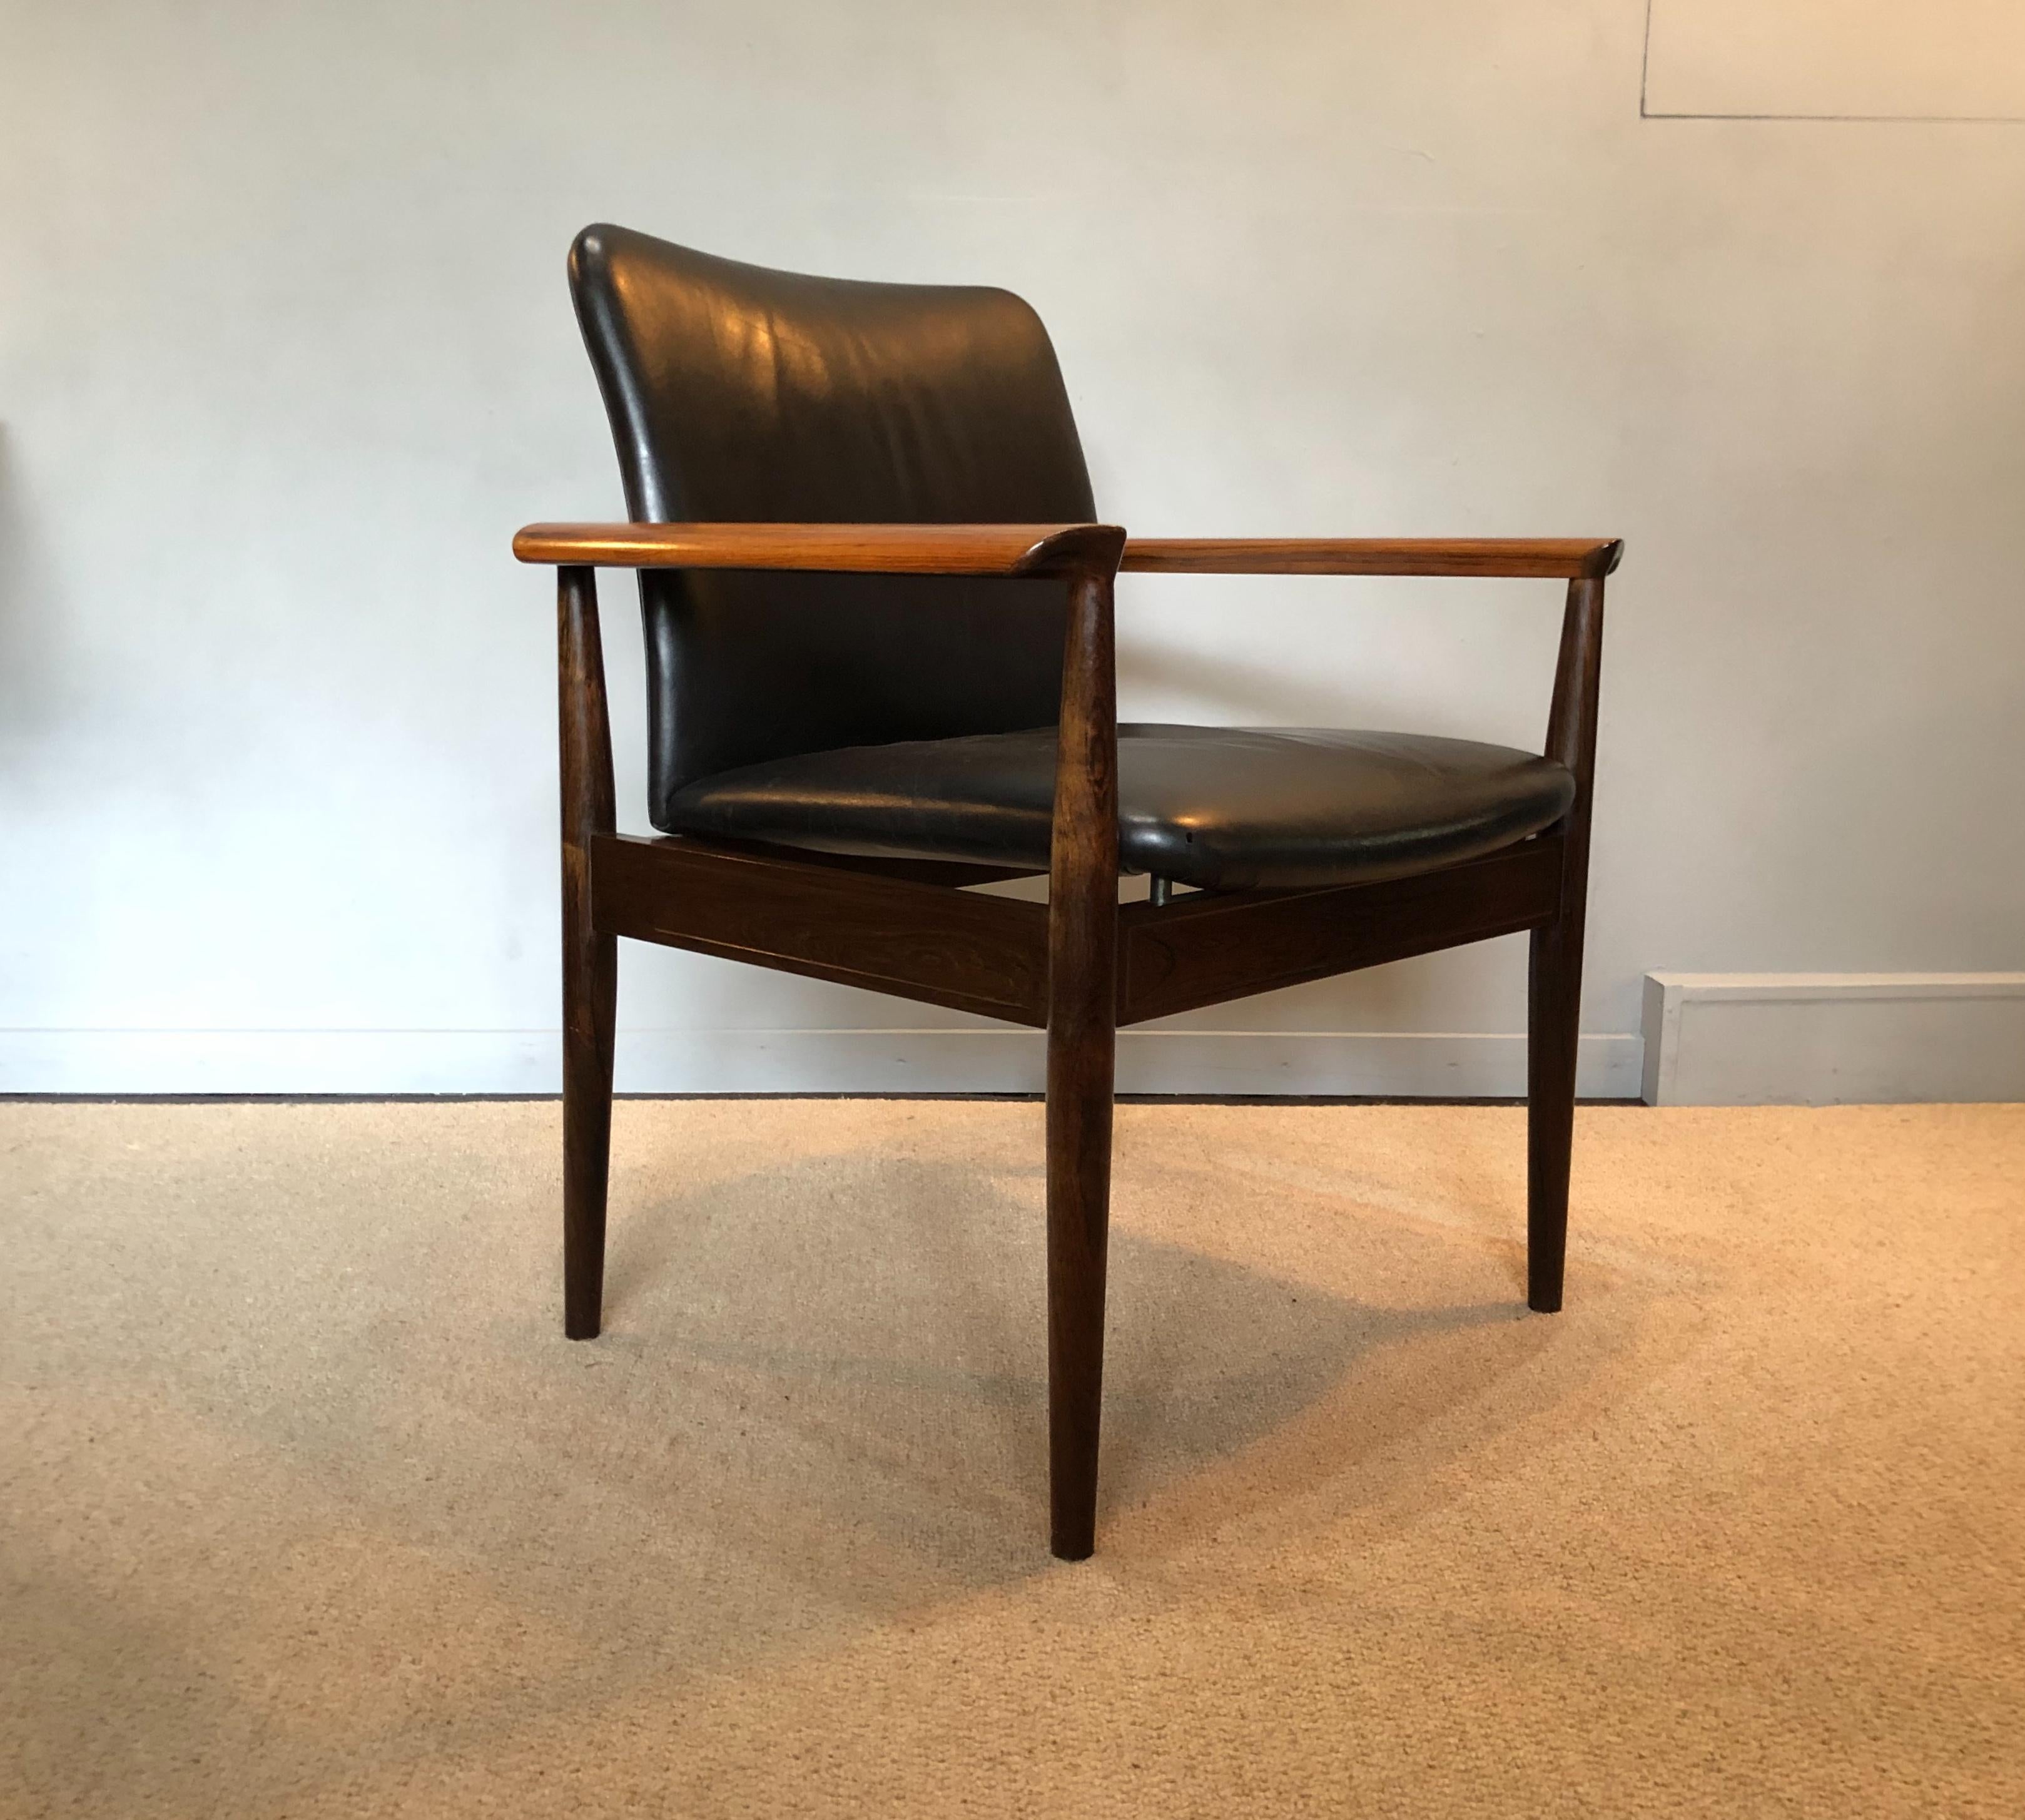 A very fine example of the classic Diplomat chair. Designed by Finn Juhl and manufactured by France and sons. Stunning rosewood frame with original black leather. In wonderful condition throughout. Frame re-polished and leather cleaned and